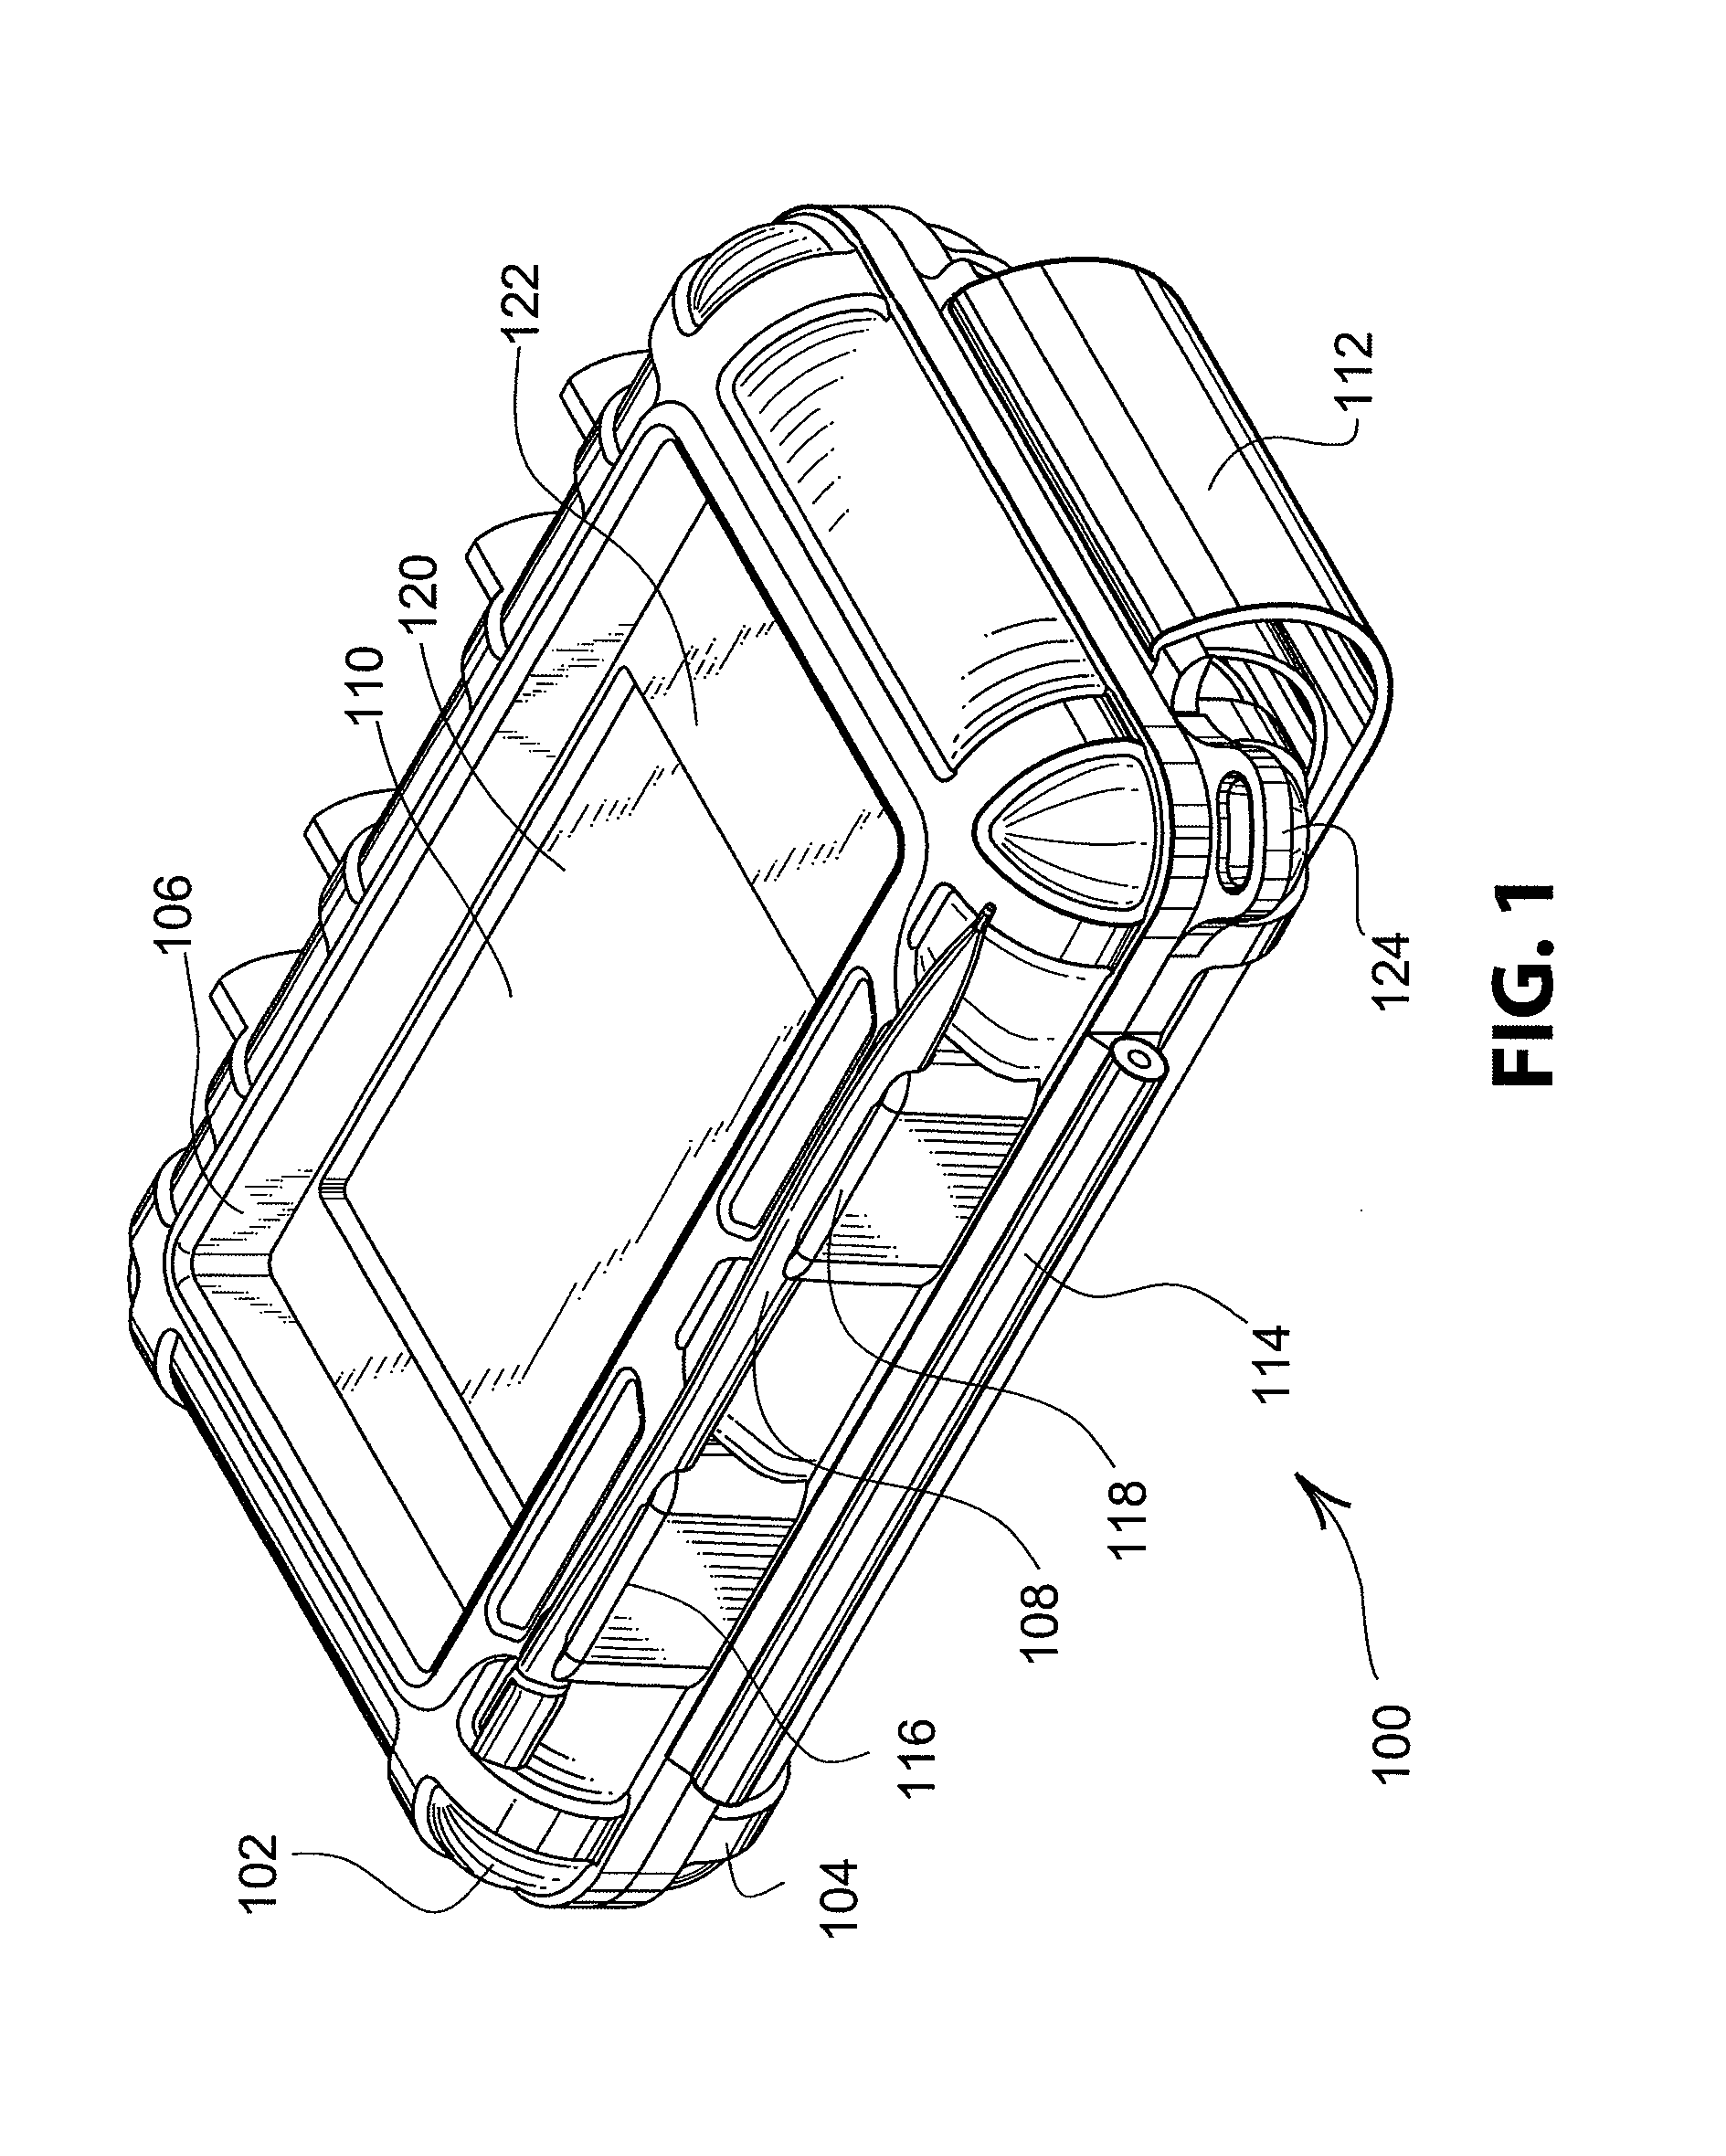 Protective enclosure for electronic device